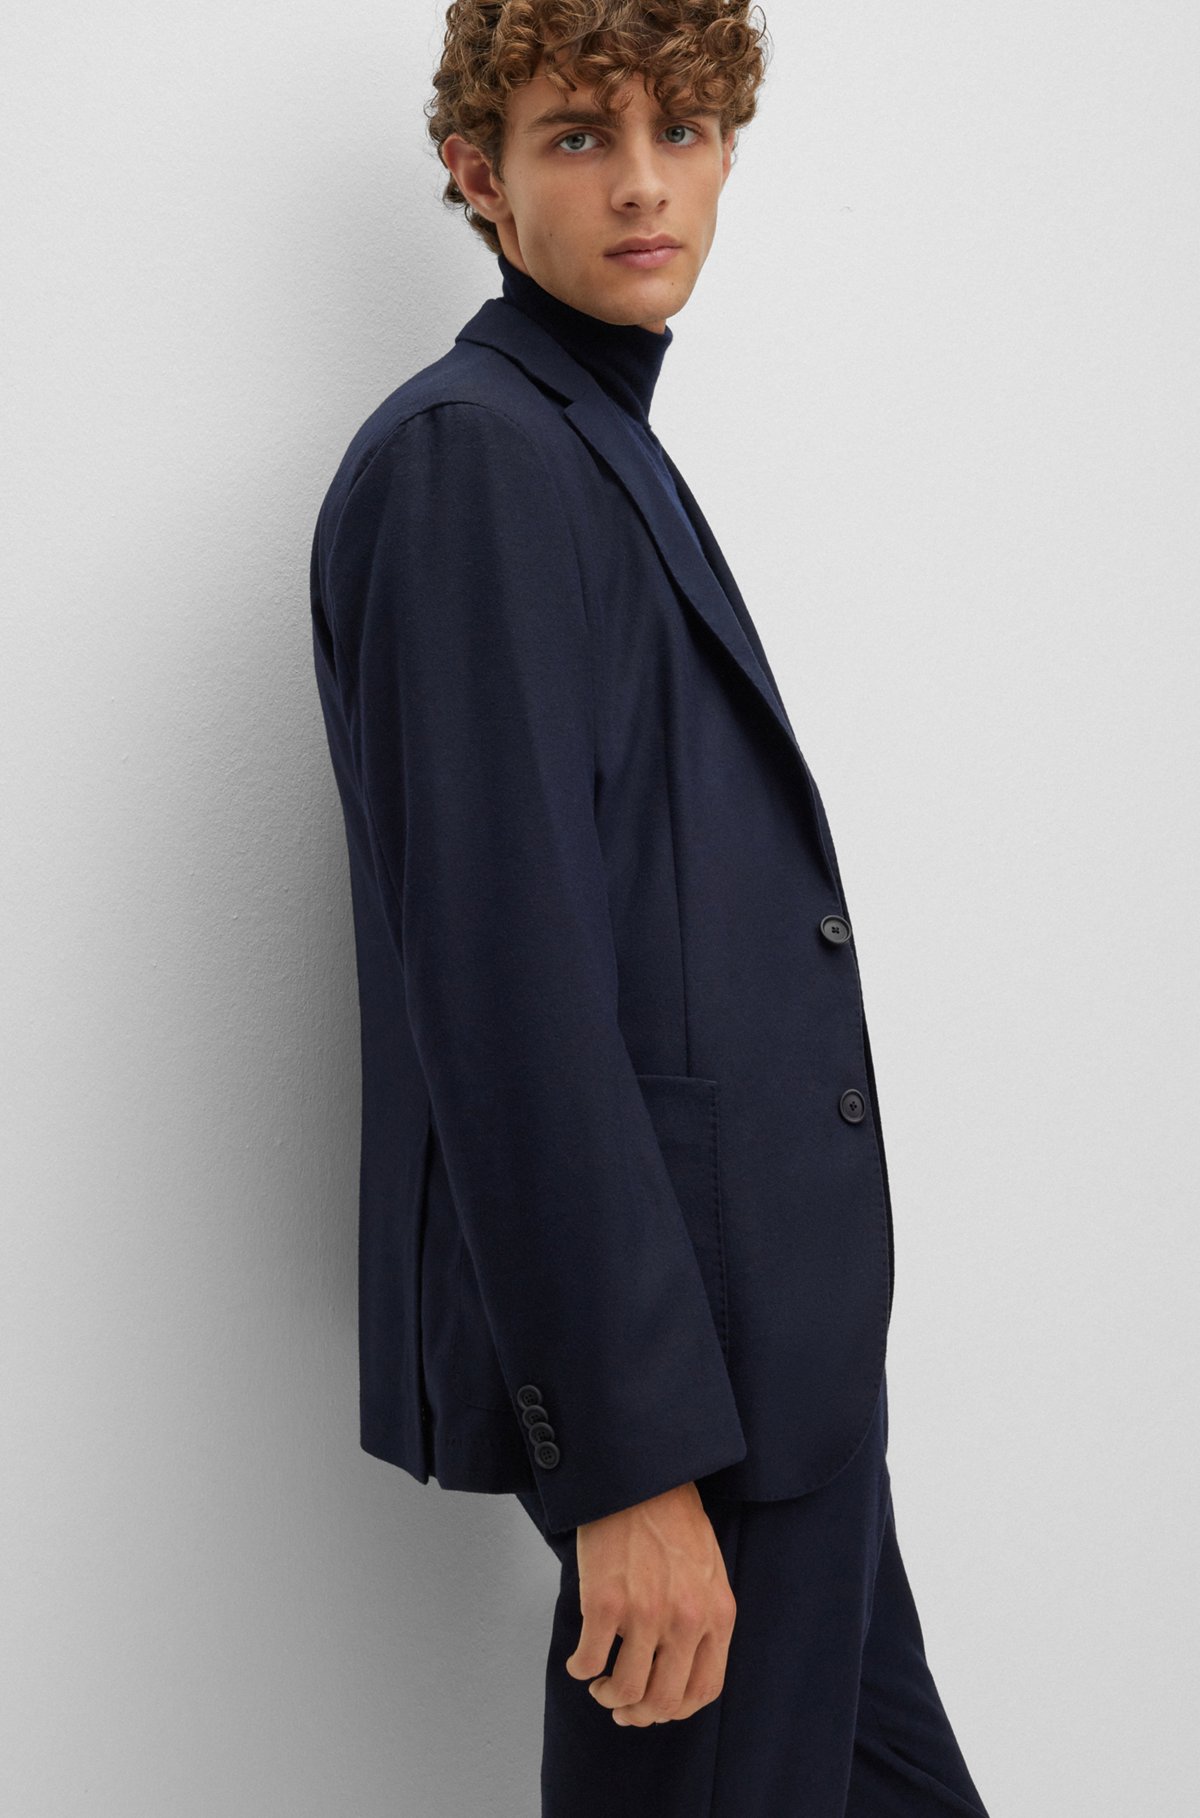 BOSS - Slim-fit single-breasted jacket in stretch material